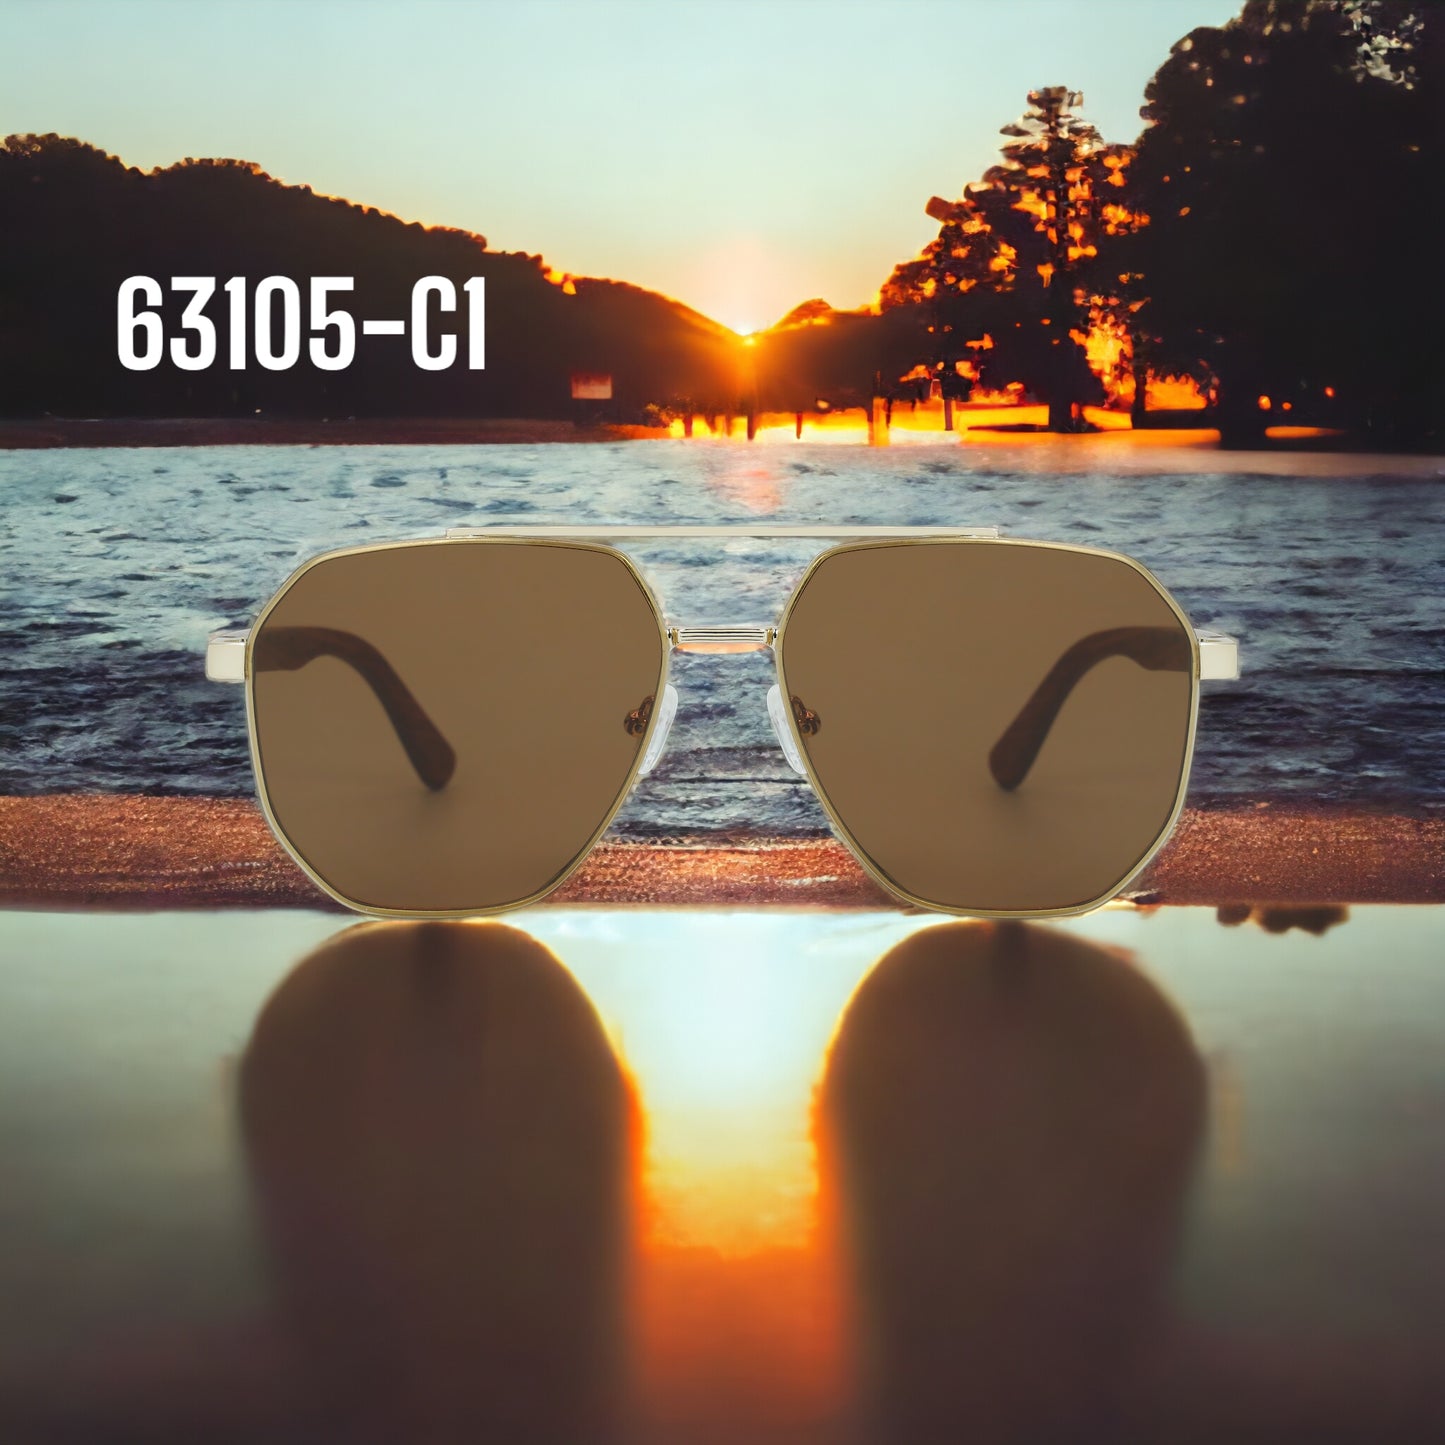 63105-C1 Stylish Sunglasses with colored Wood/Bamboo Frame UV400 Lens fit all weather